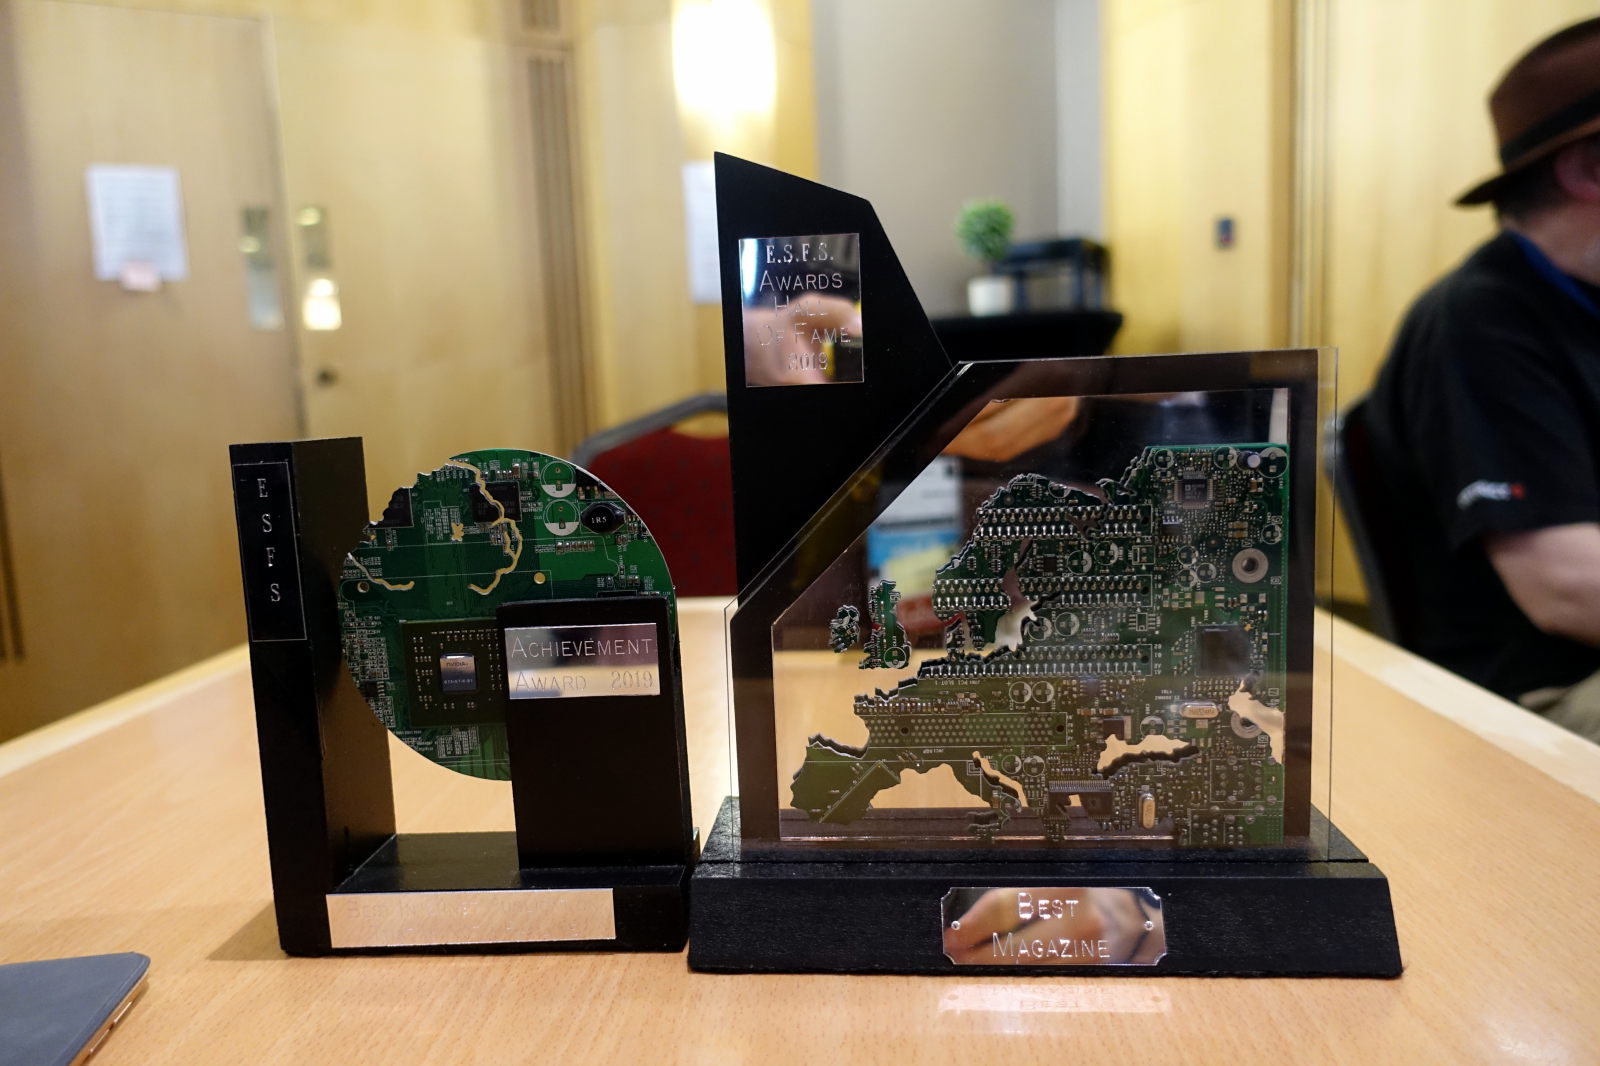 Two awards standing next to each other. To the lefy ESFS Achievement Award - made of round piece of circuit board in a wooden holder. To the right ESFS Award for Best Magazine - map of Europe cut out of circuit board on a wooden holder.